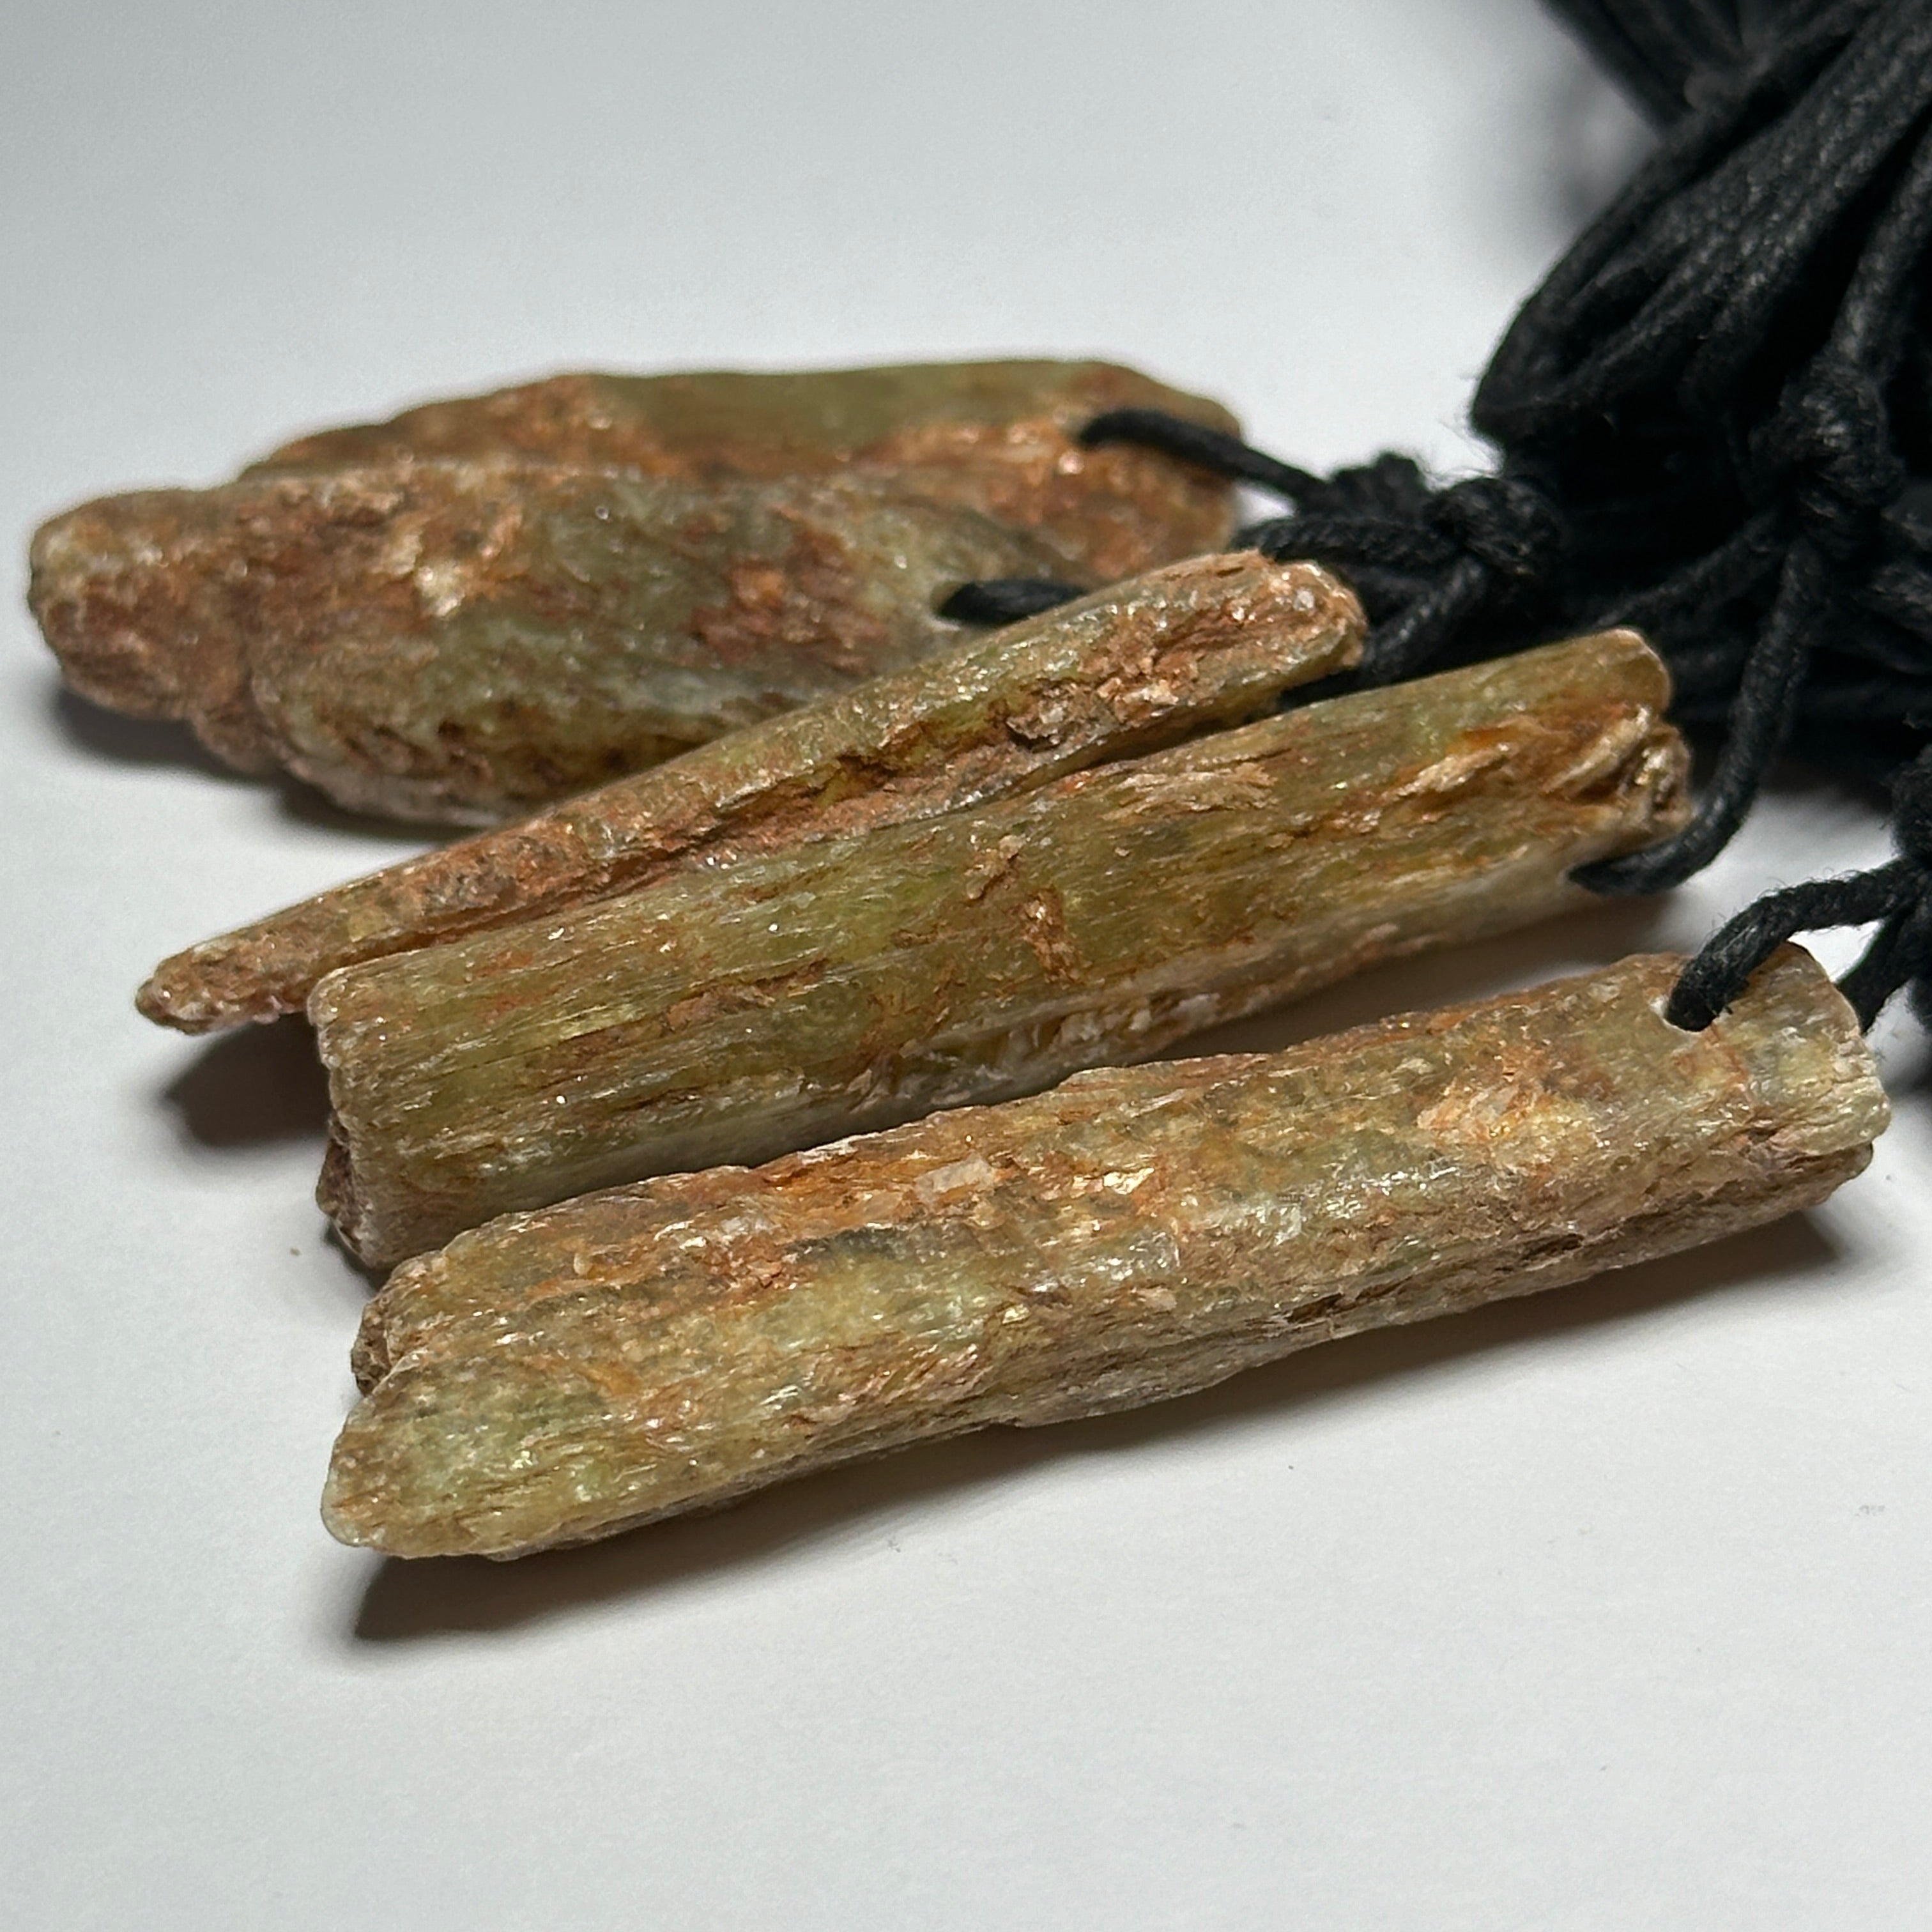 5 pcs Tanzanian Kyanite with Mica Crystal pendants lot. Price is for all 5